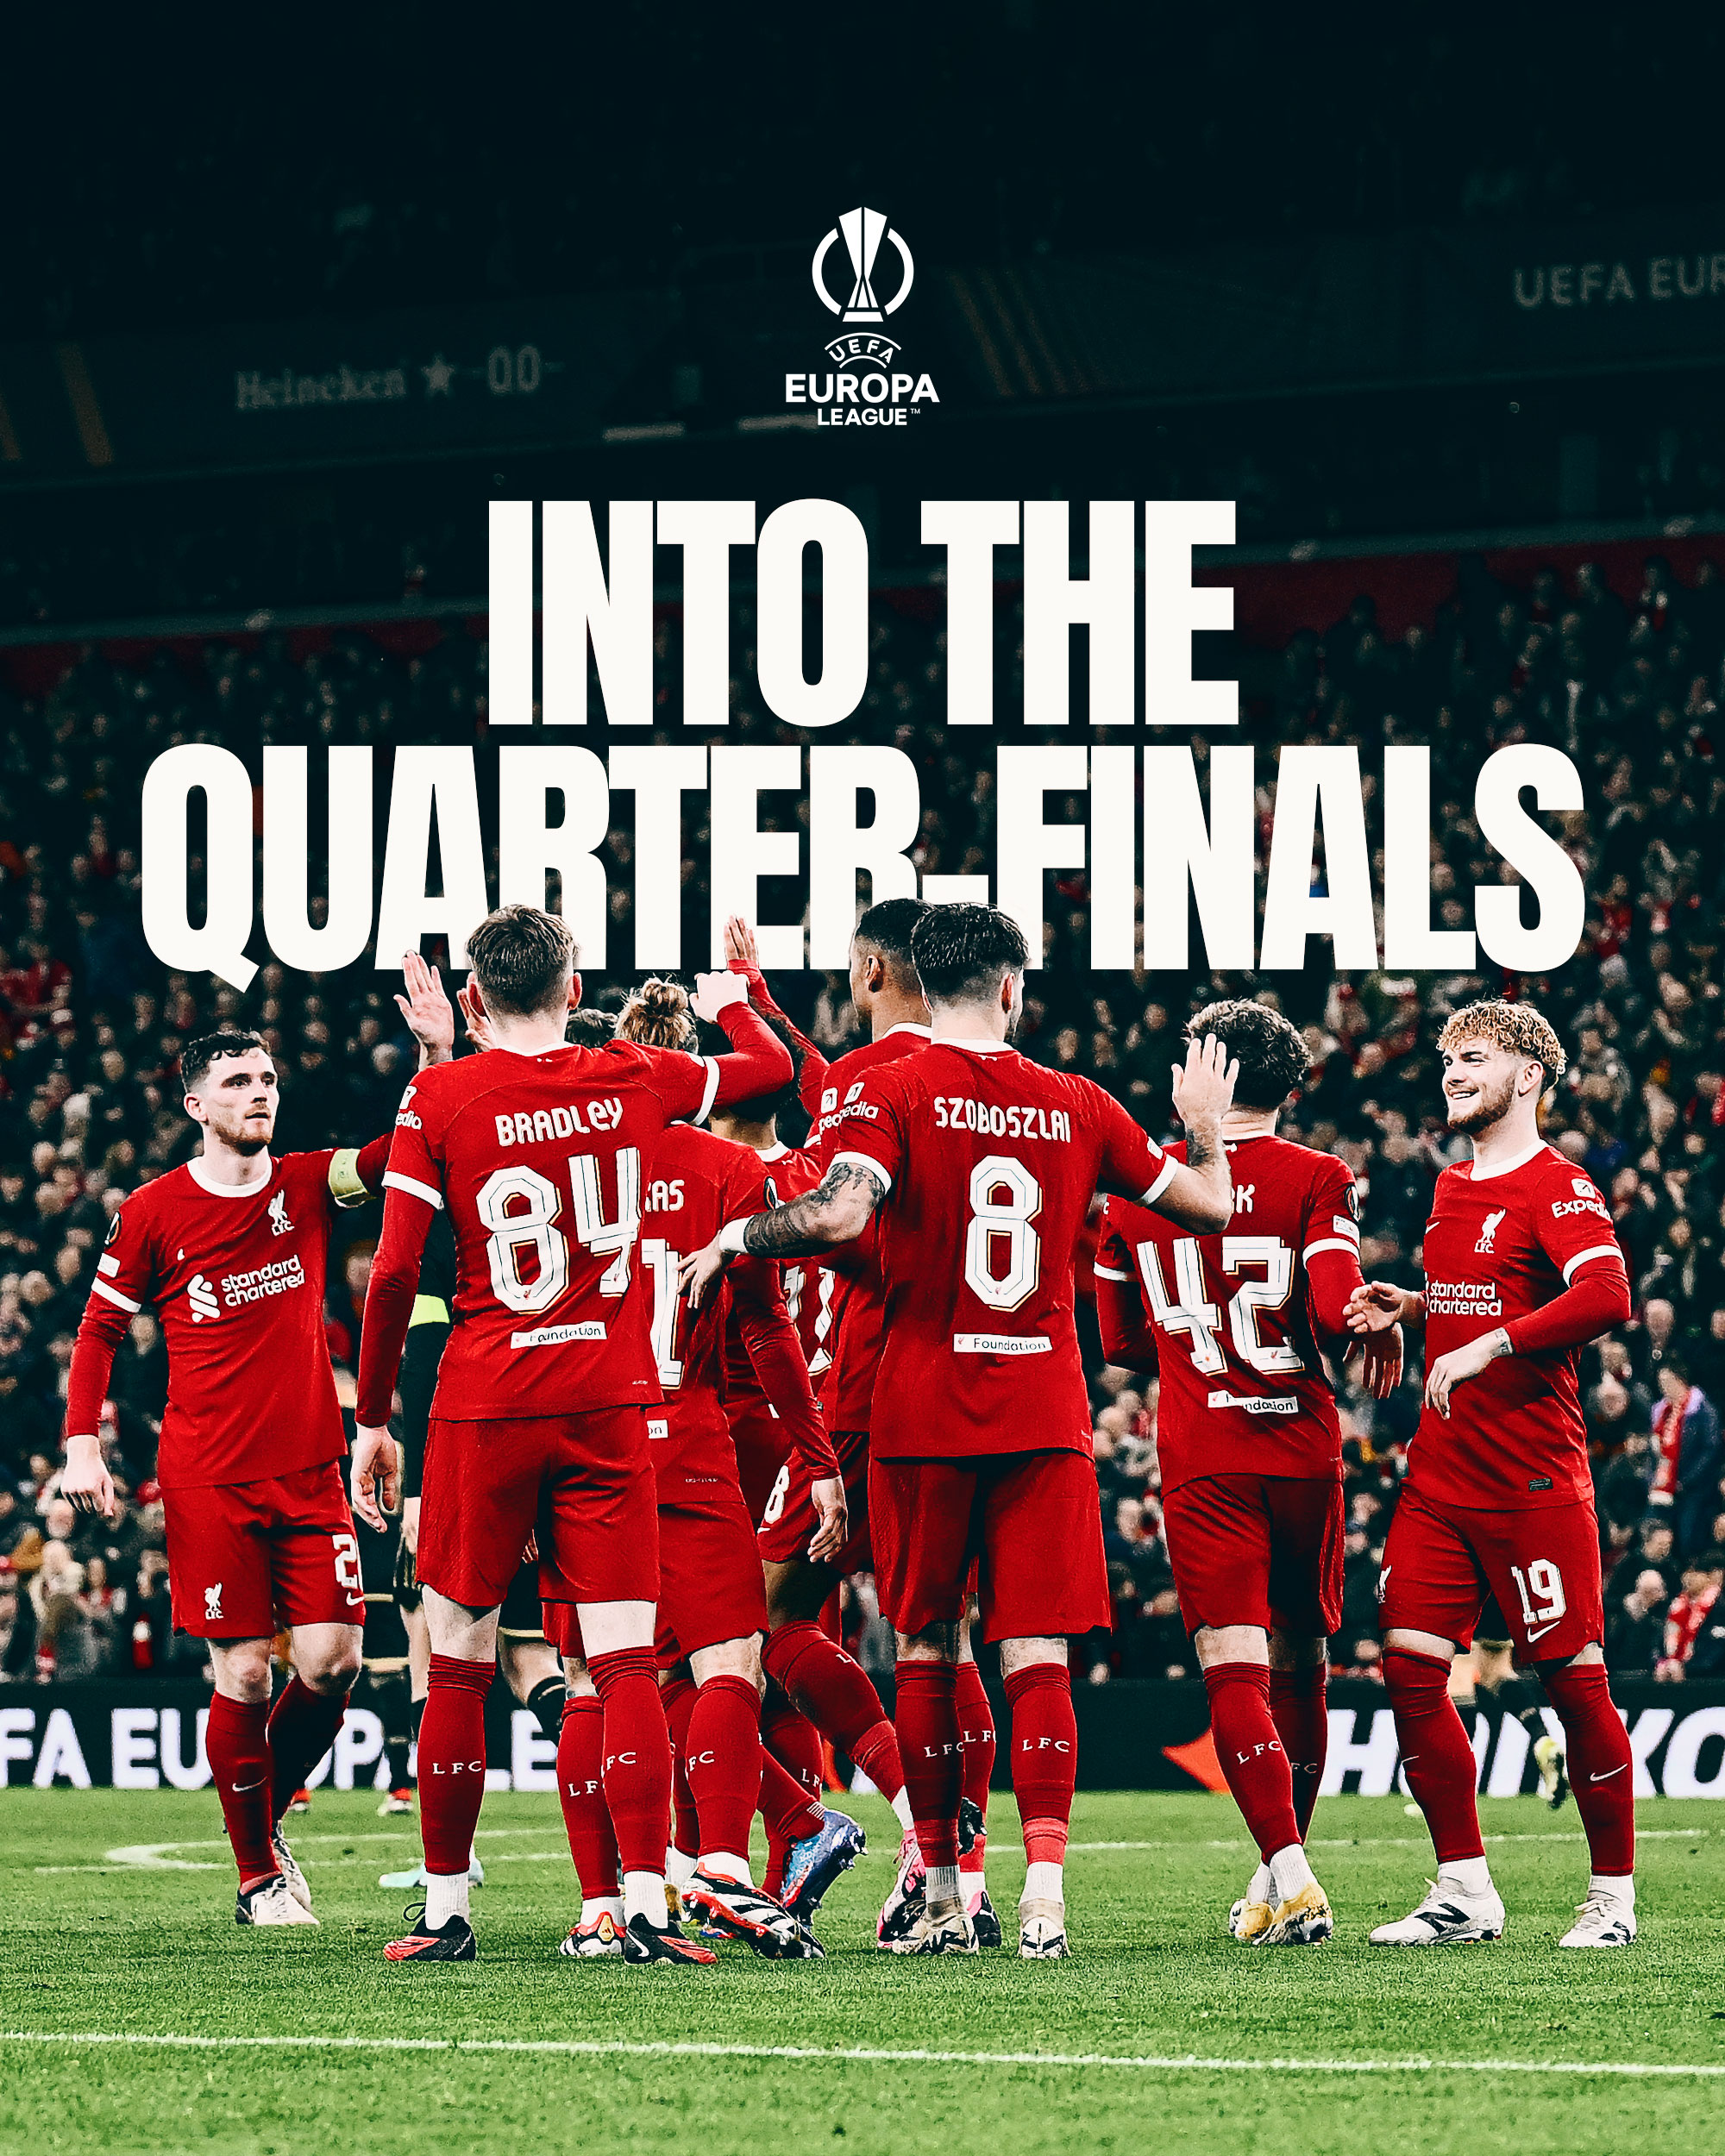 Graphic showcasing that Liverpool have reached the quarter-finals of the UEL.

The graphic includes photography from Liverpool's victory over Sparta Prague.